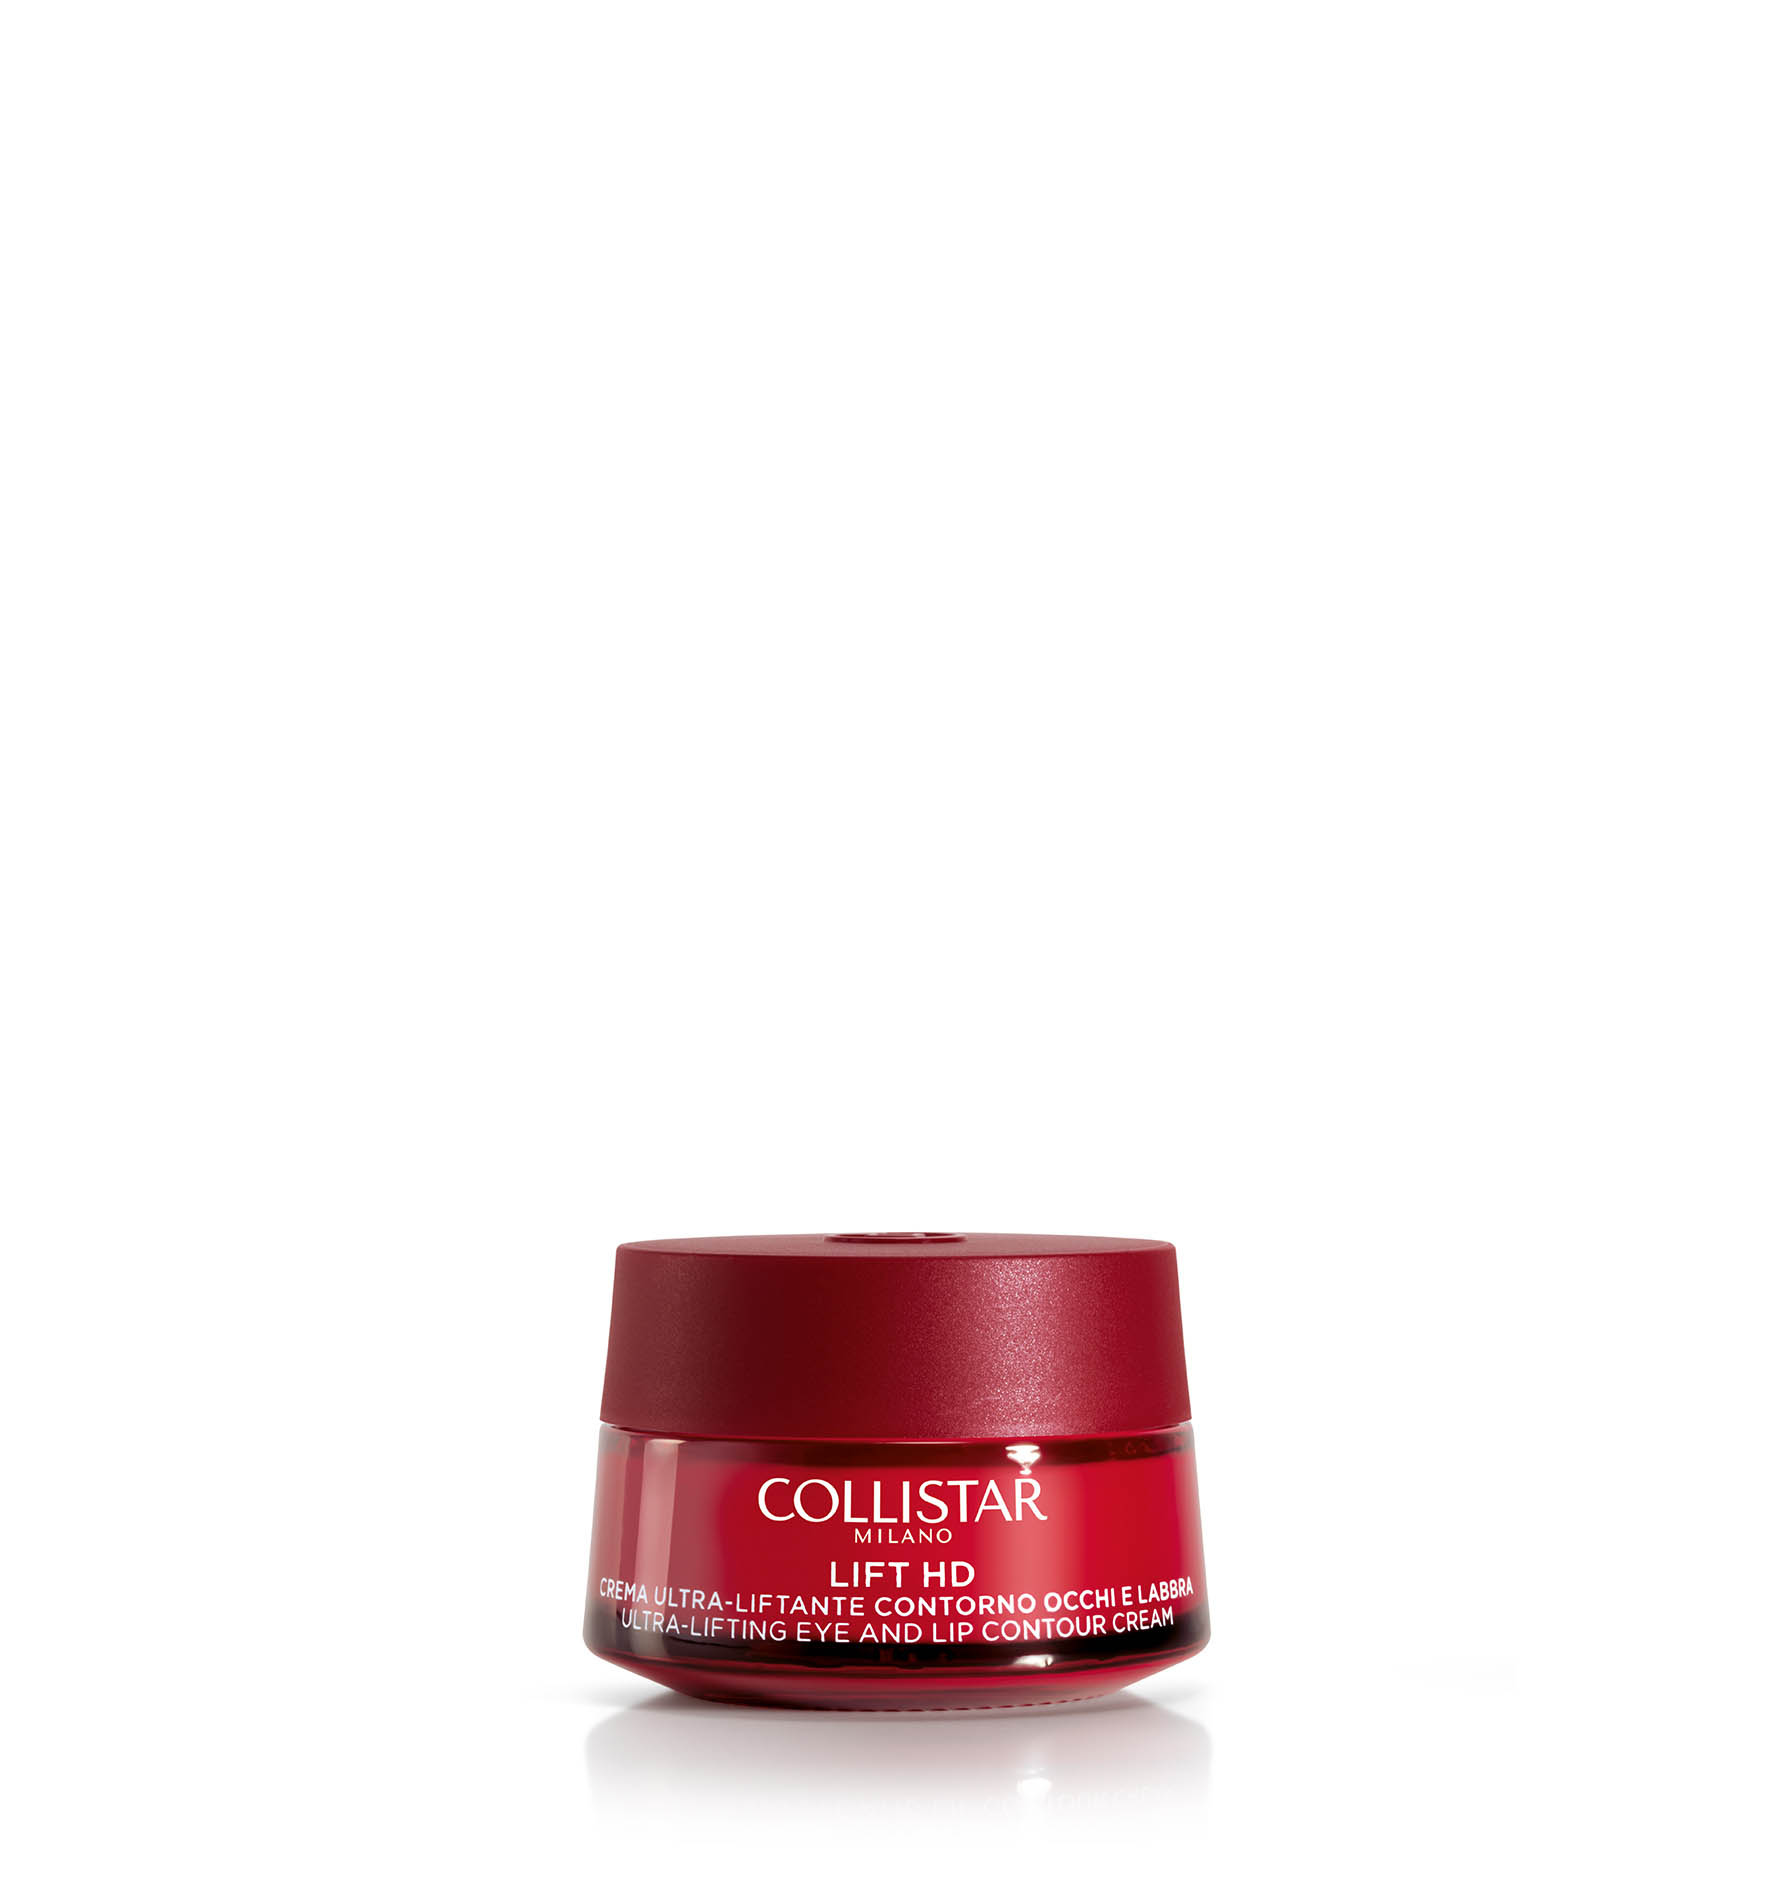 ULTRA LIFTING EYE AND LIP CONTOUR CREAM - Anti-age | Collistar - Shop Online Ufficiale